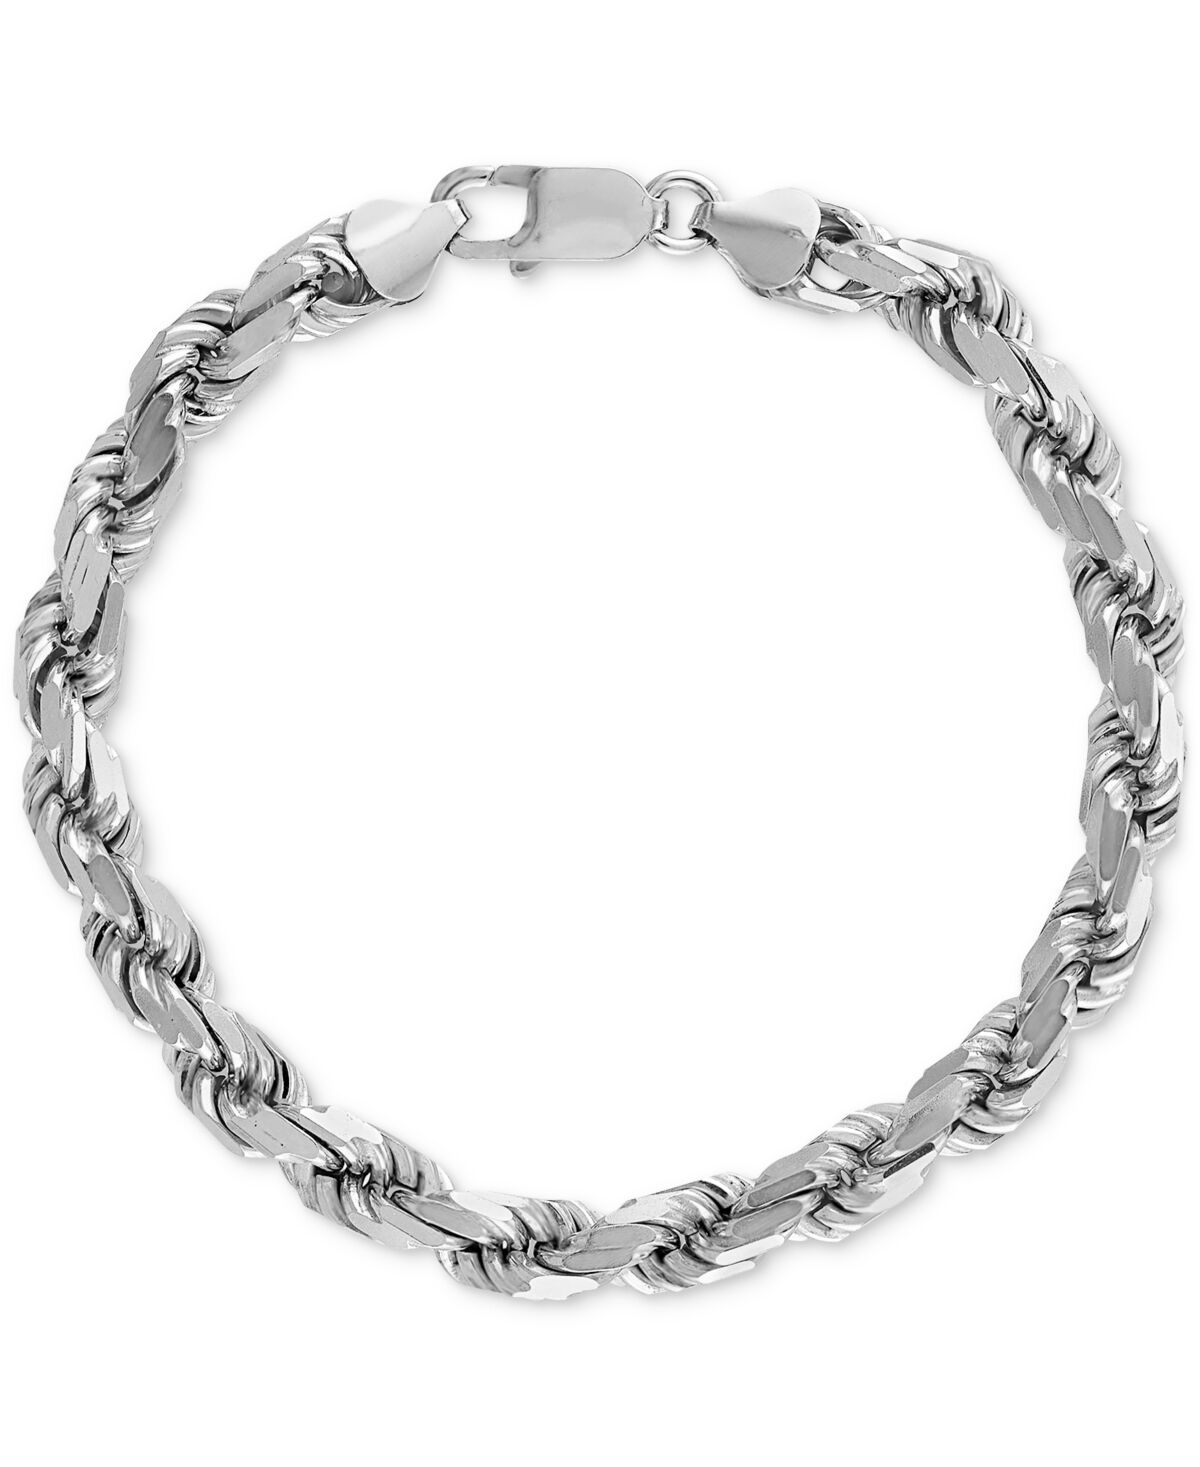 Esquire Men's Jewelry Rope Link Chain Bracelet (7.5mm), Created for Macy's - Silver